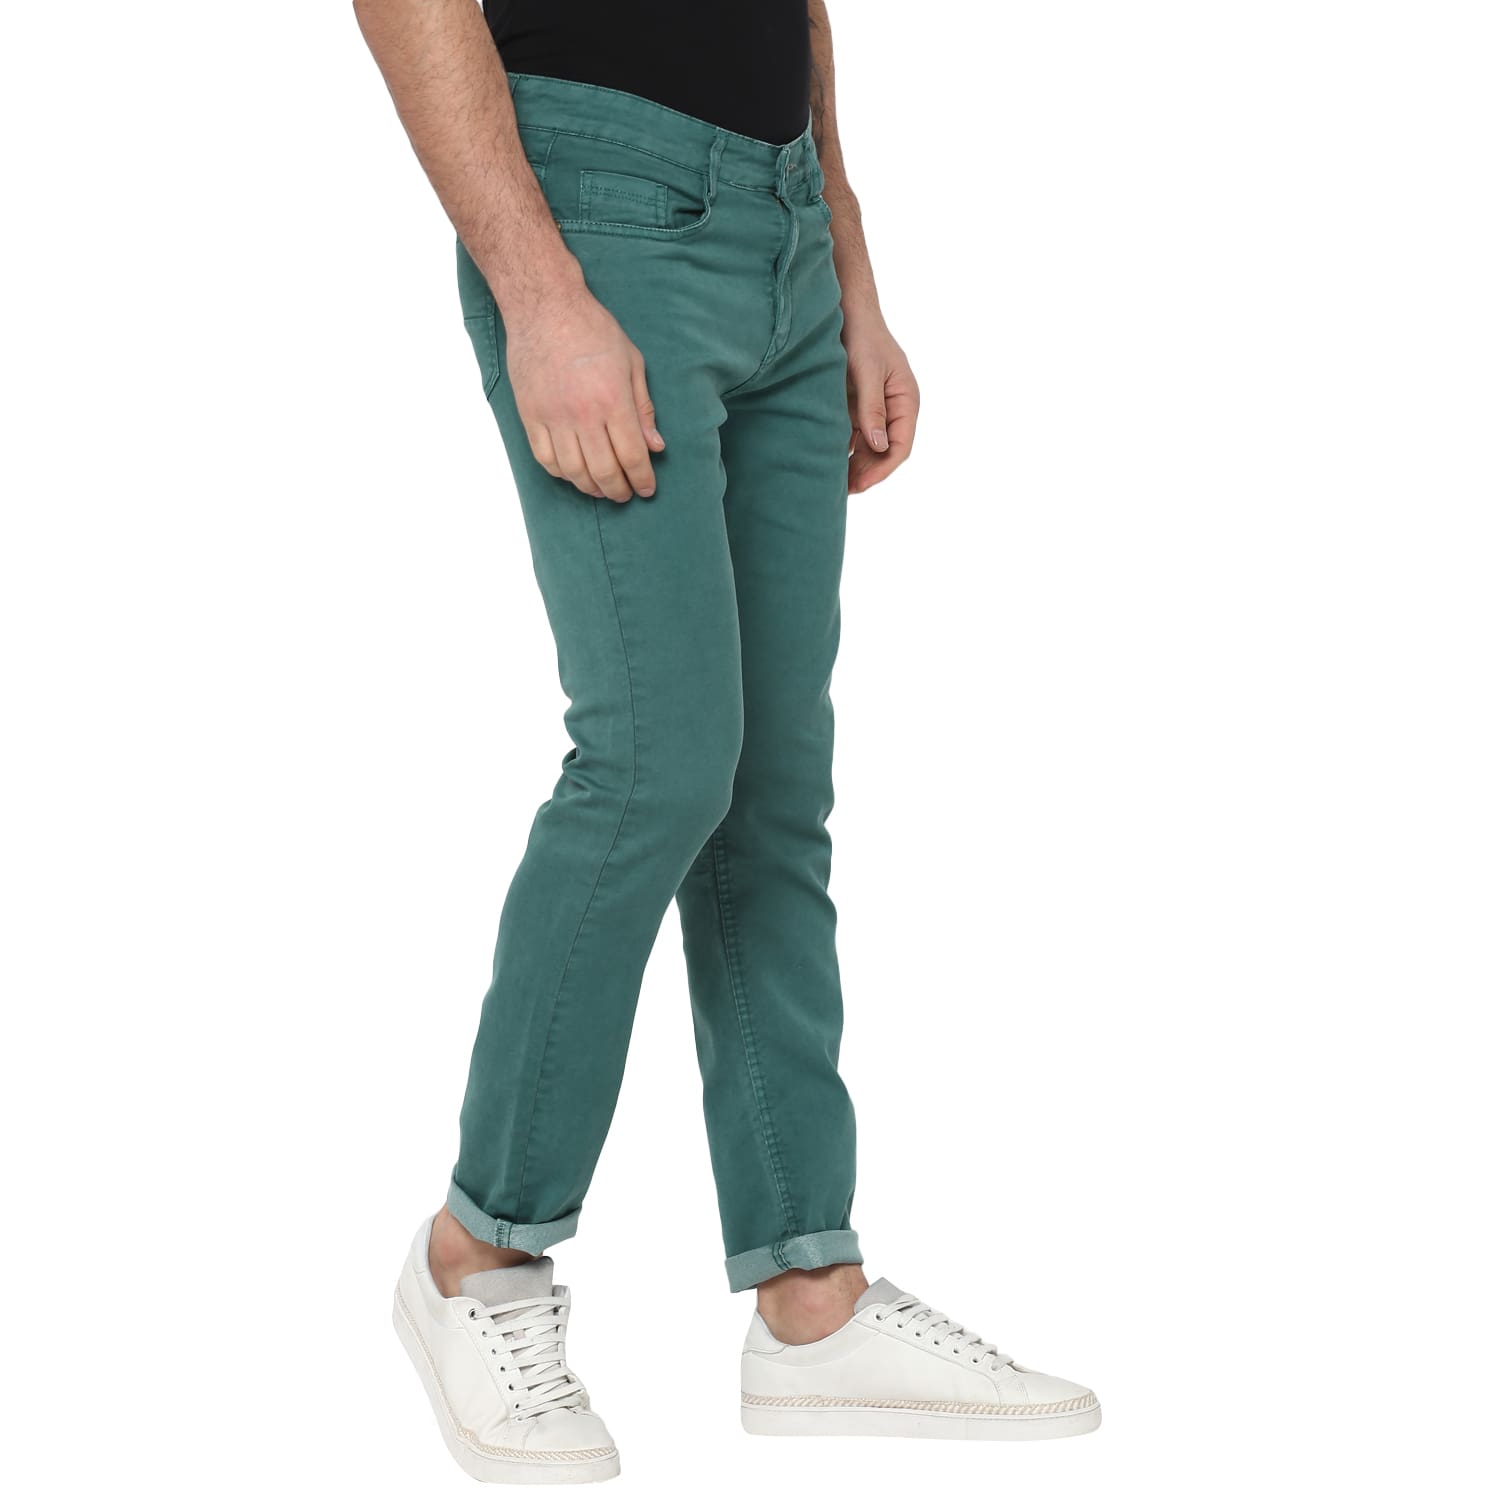 Men's Sea Green Slim Fit Washed Jeans Stretchable